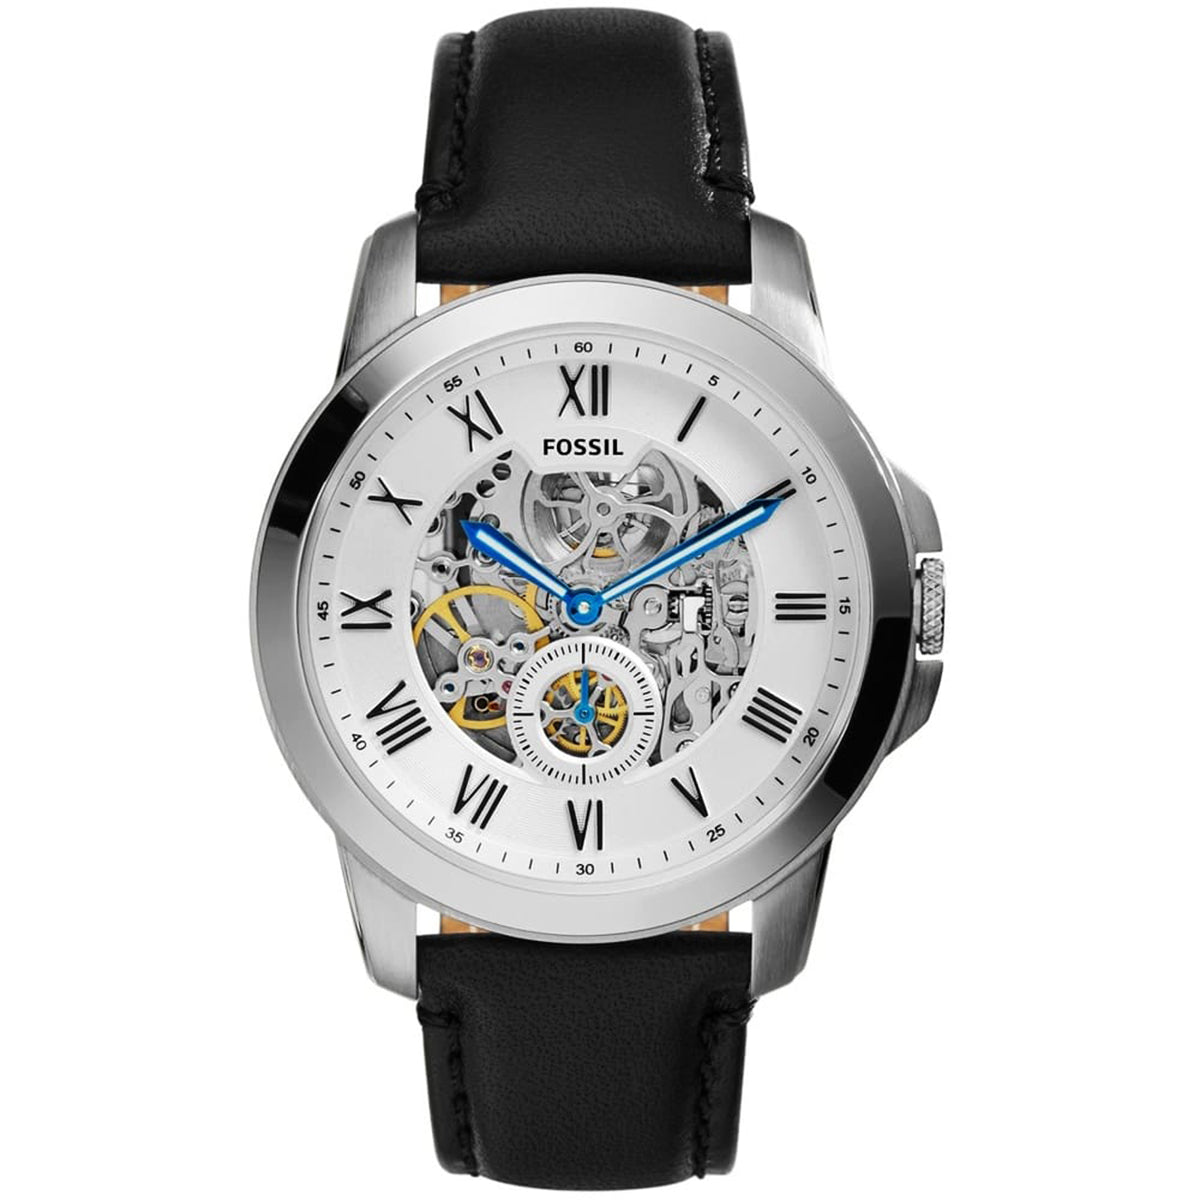 Men's Grant automatic watch with Black Leather strap